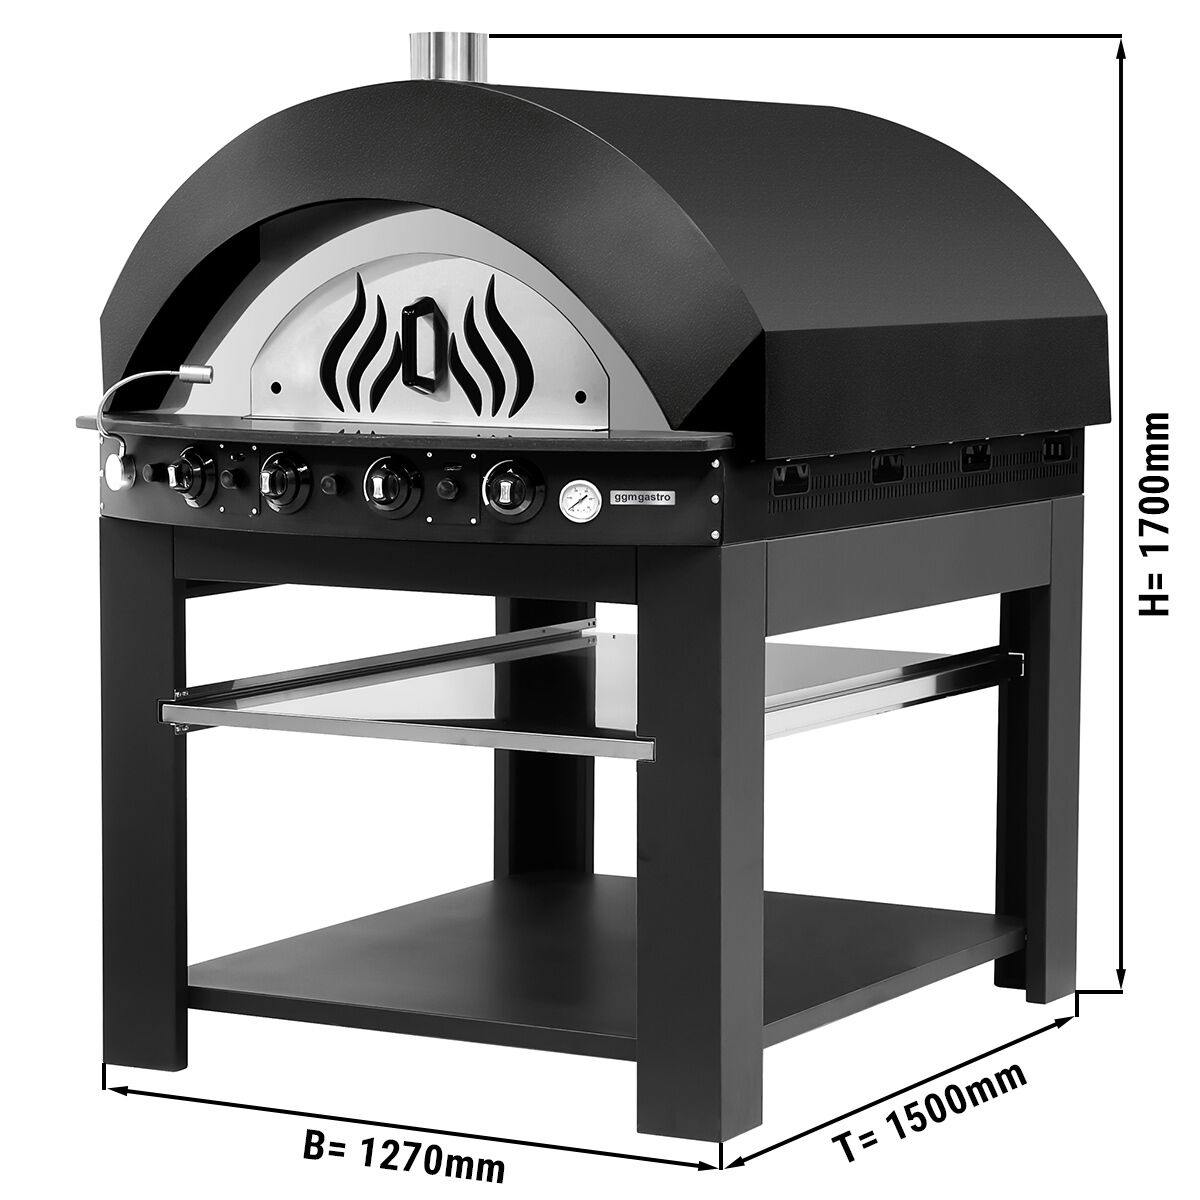 Gas pizza oven - Black - 9x 25cm - Manual - incl. stand